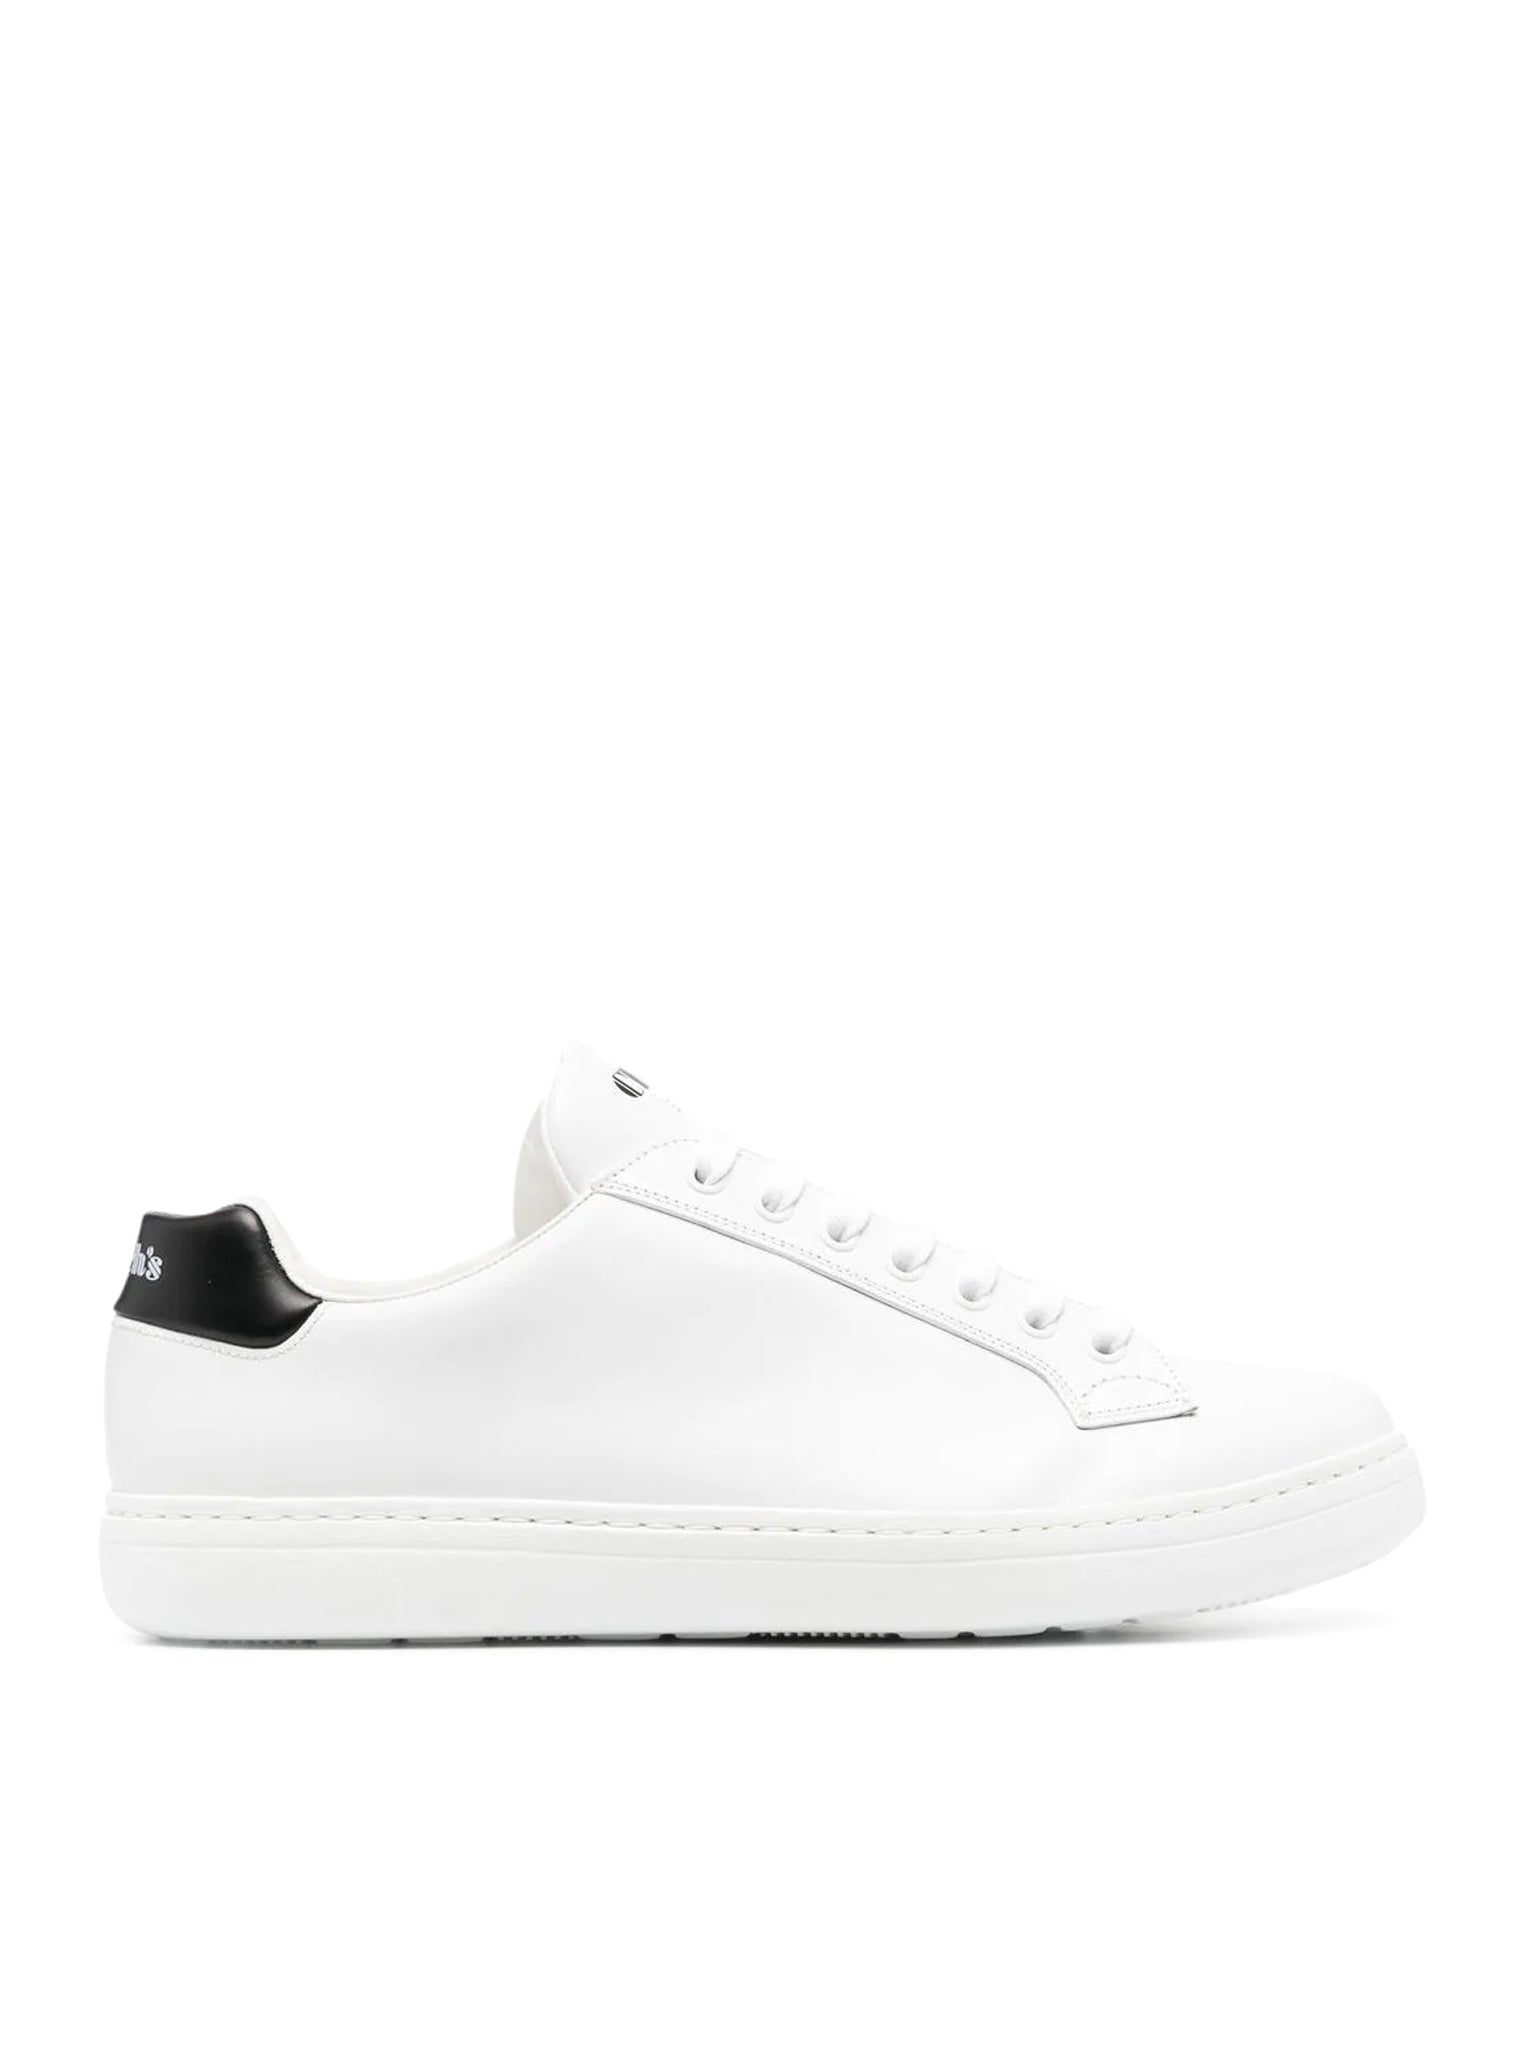 Sneakers Boland S